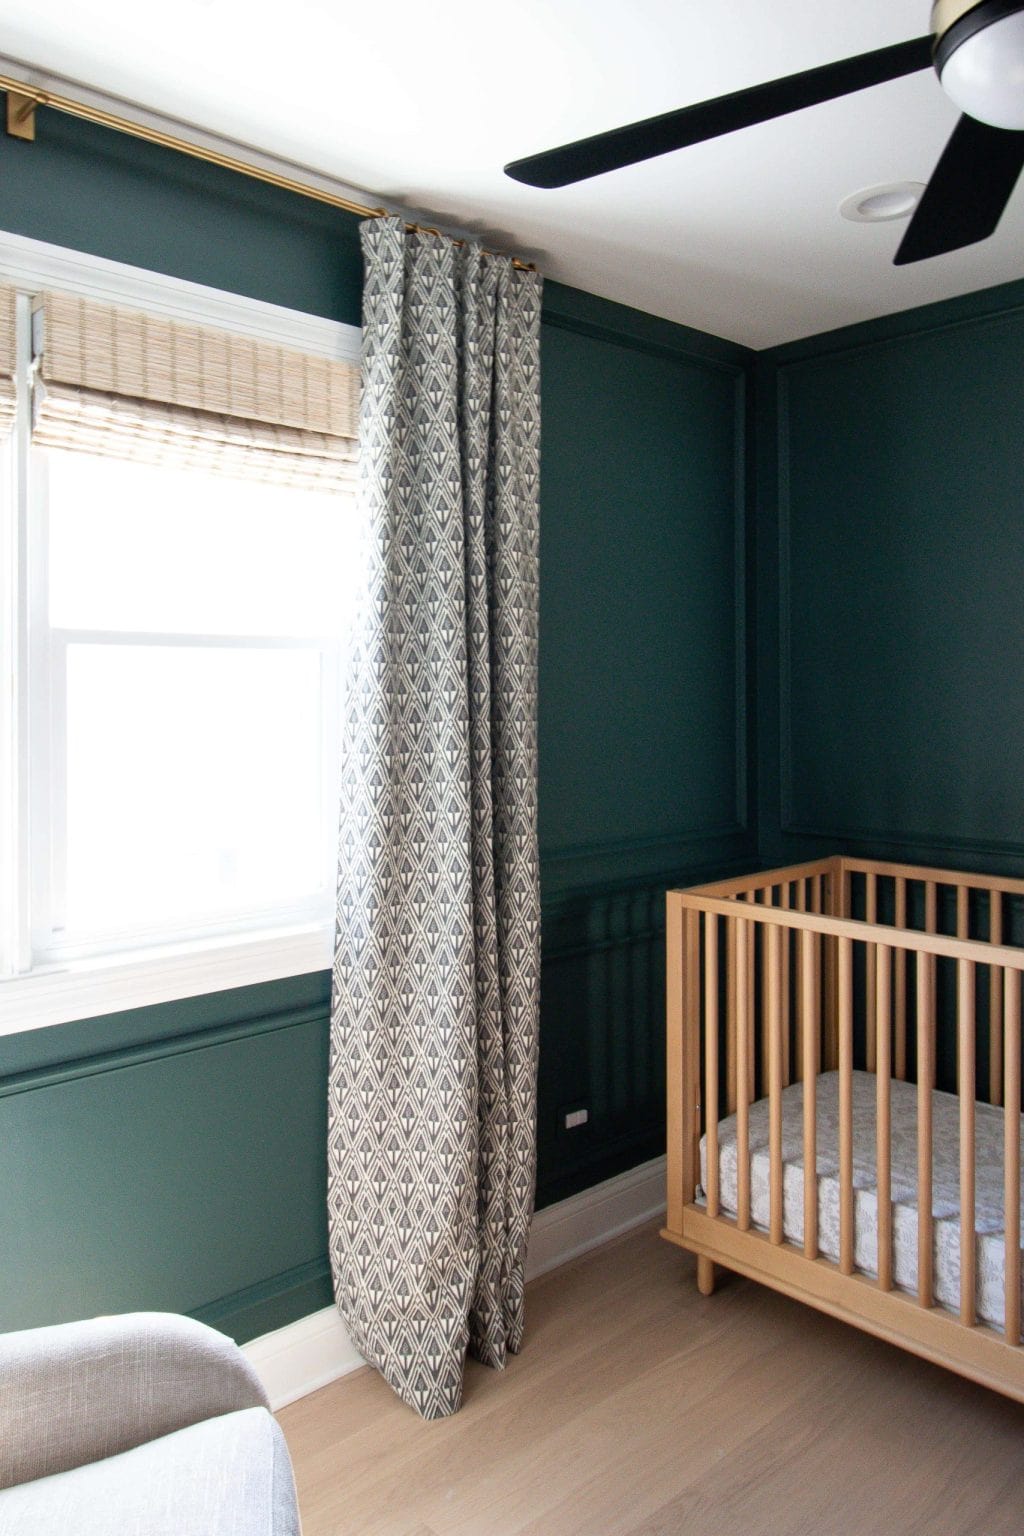 Finding blackout nursery curtains